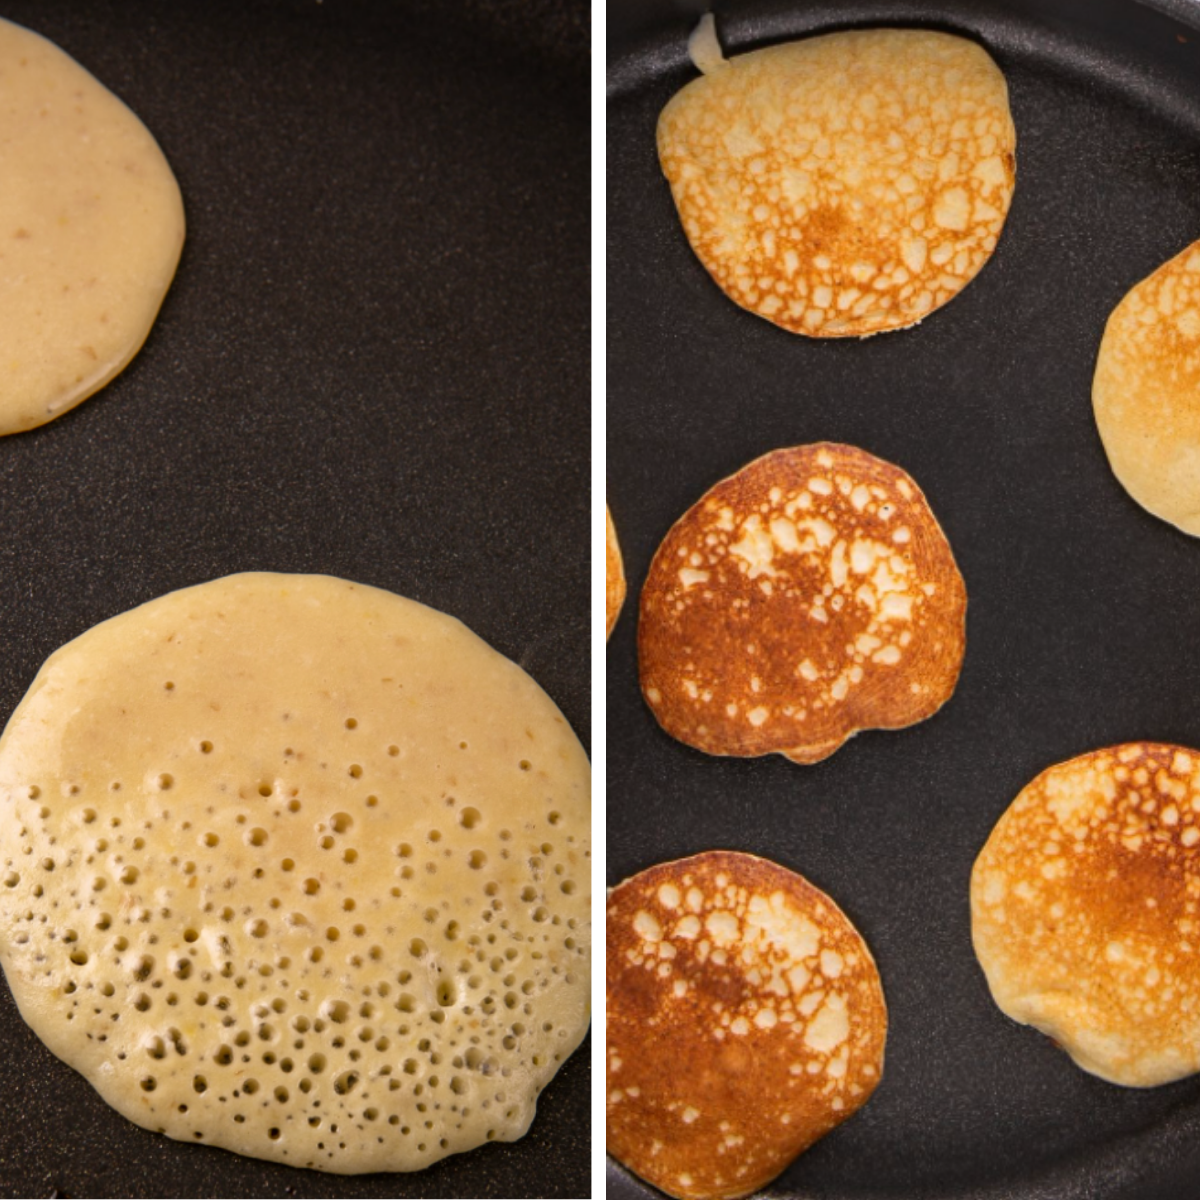 How to fry pancakes from No Guilt Bakes' Pancake Mix